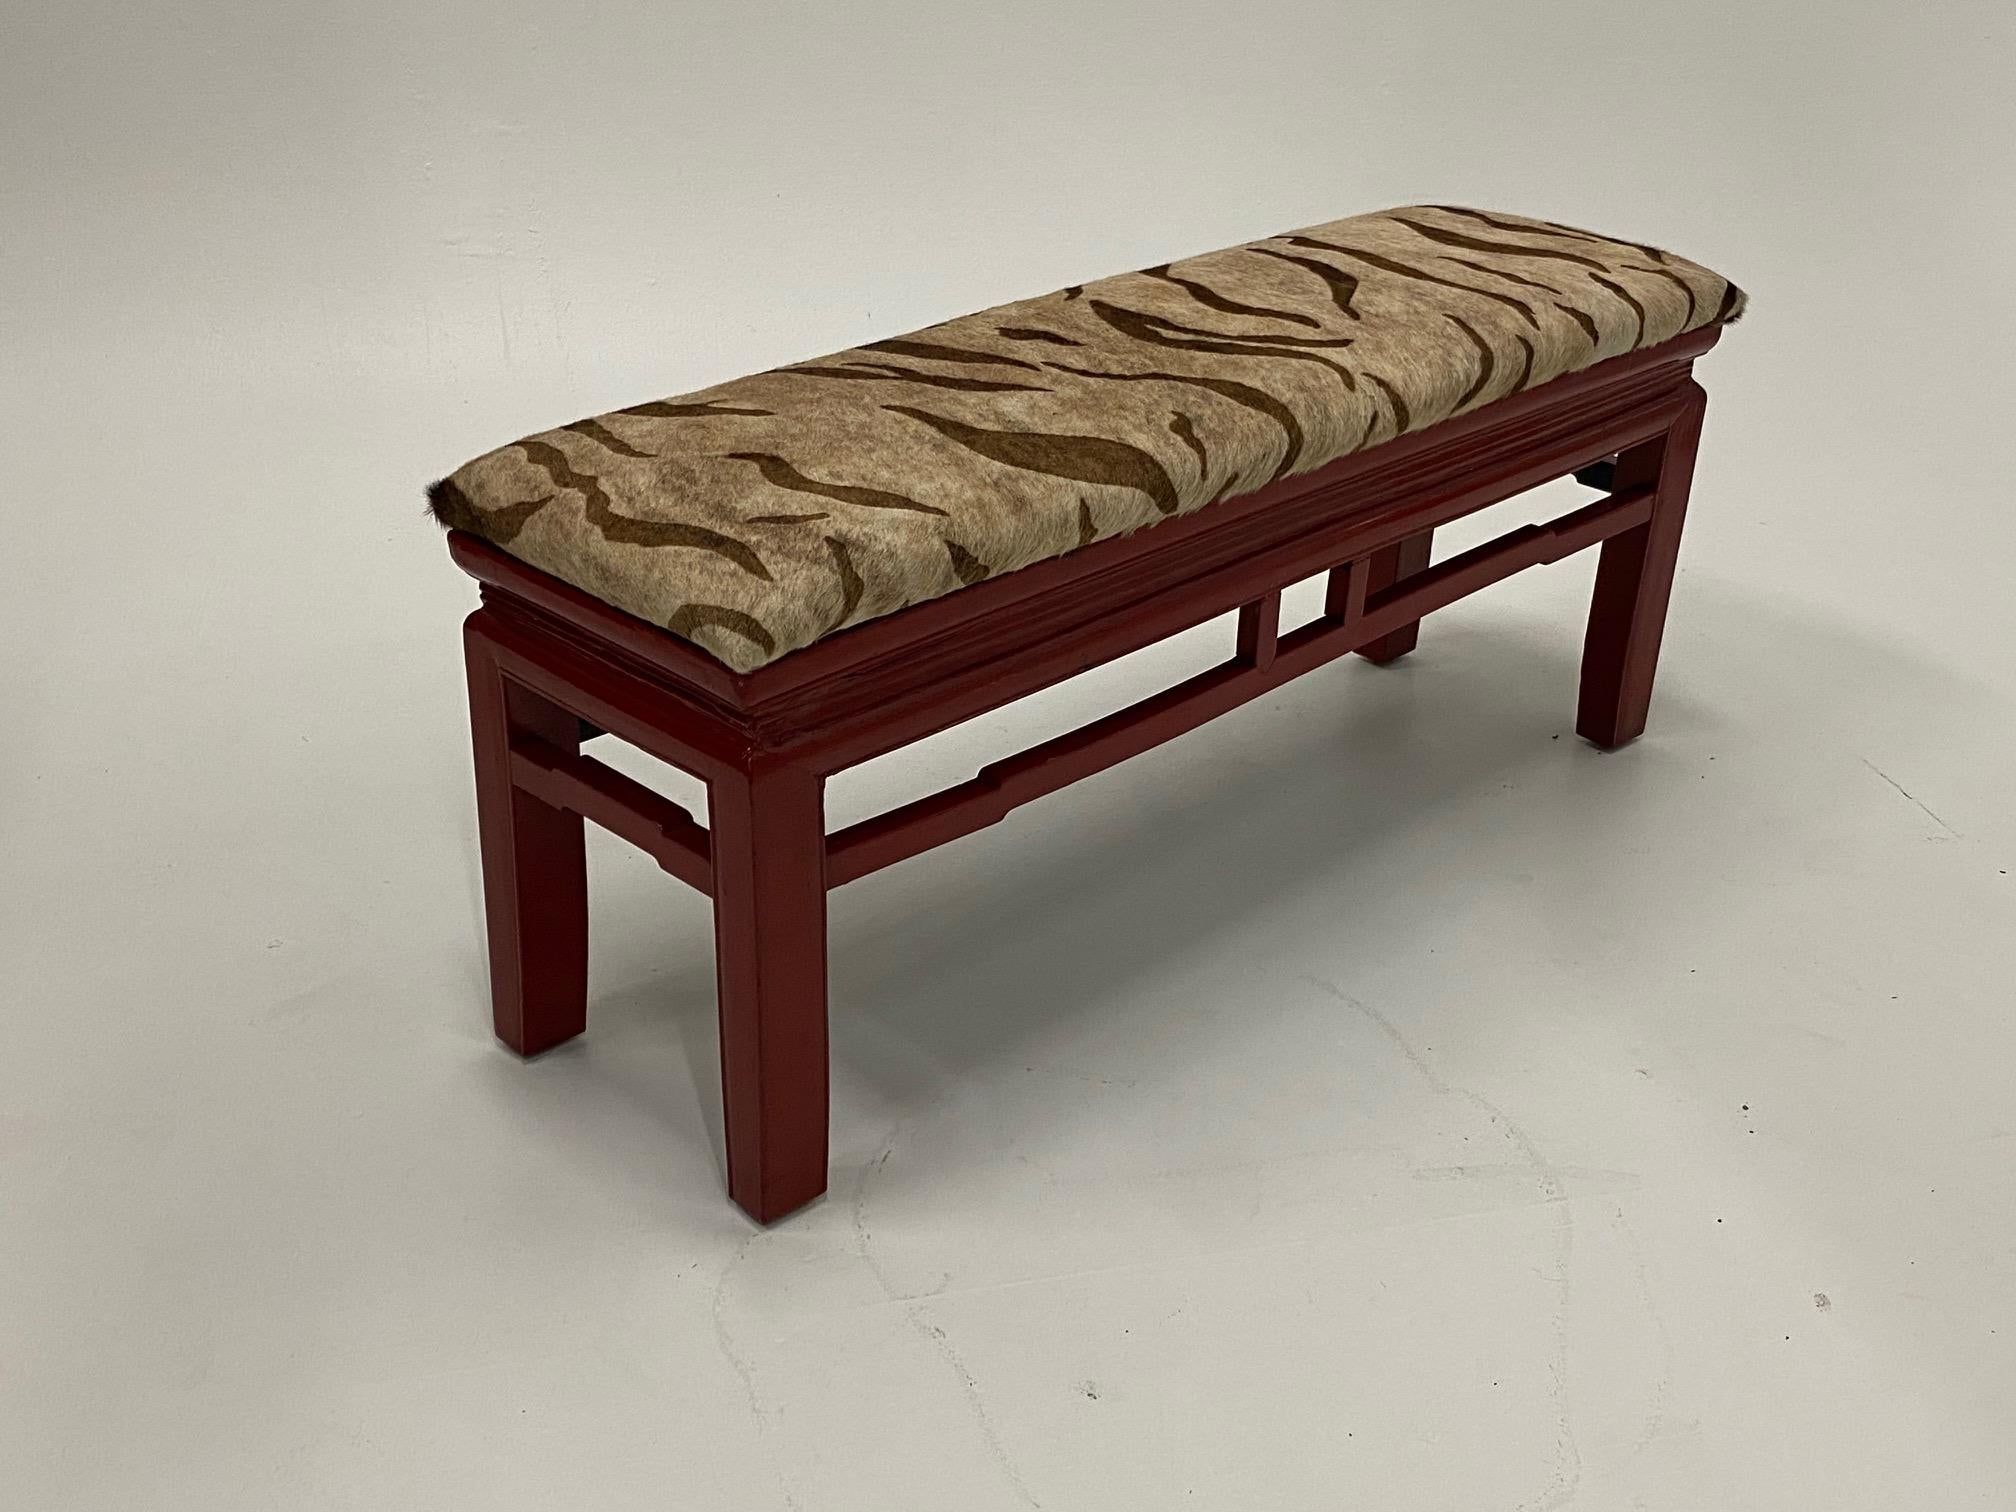 Super stylish cinnabar red Chinese lacquer bench with beautiful silhouette, recently updated with printed cowhide upholstery.